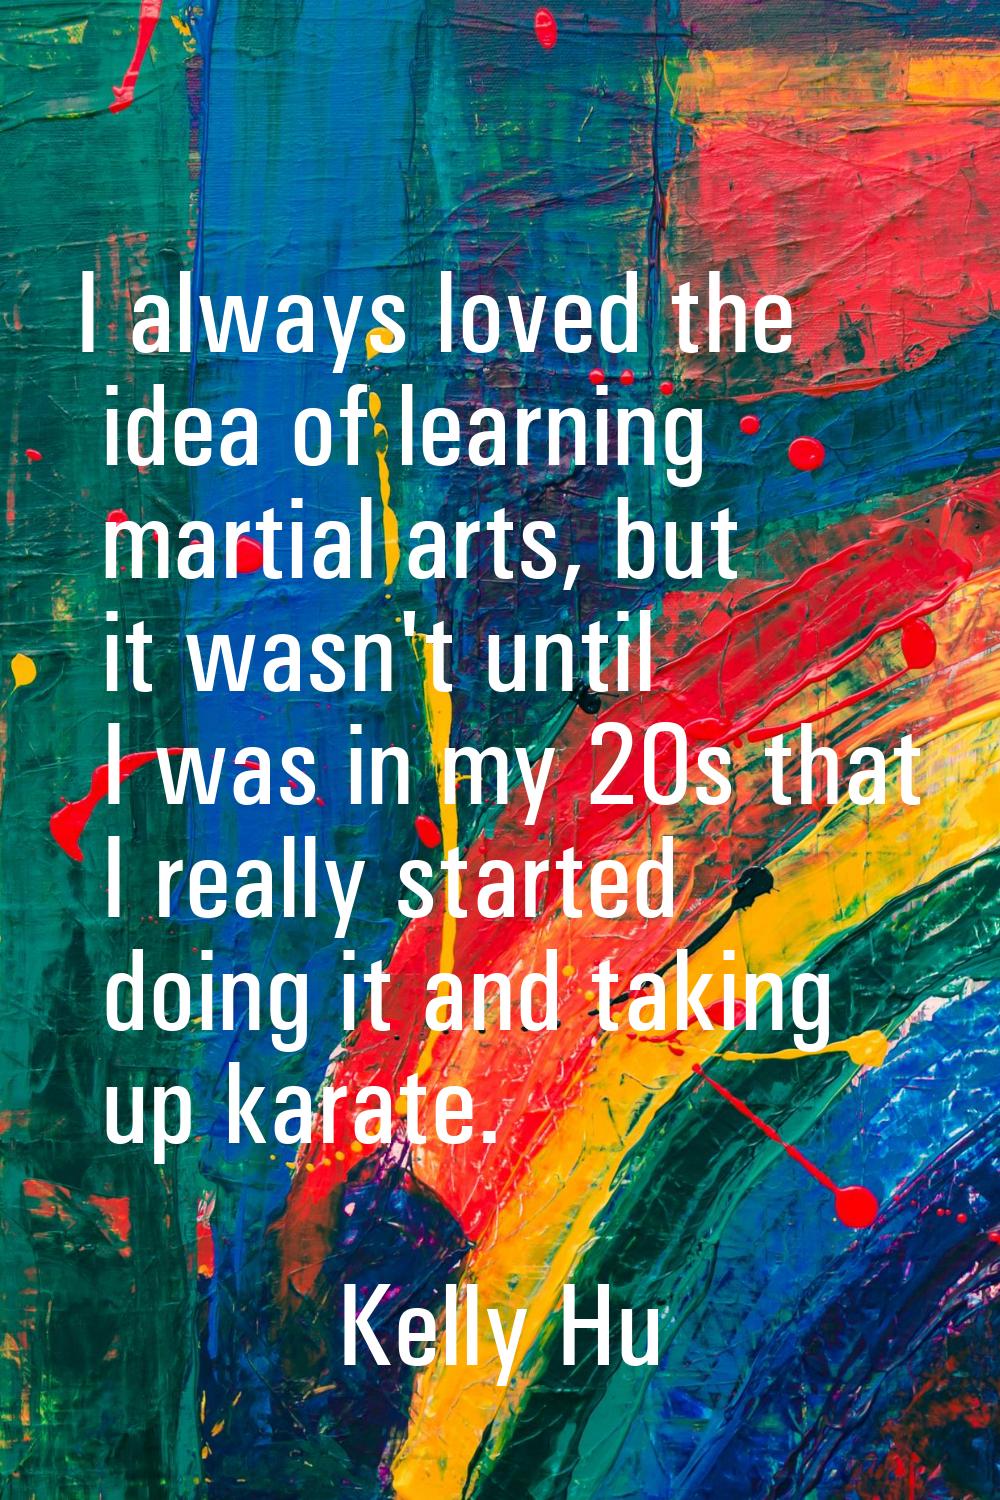 I always loved the idea of learning martial arts, but it wasn't until I was in my 20s that I really